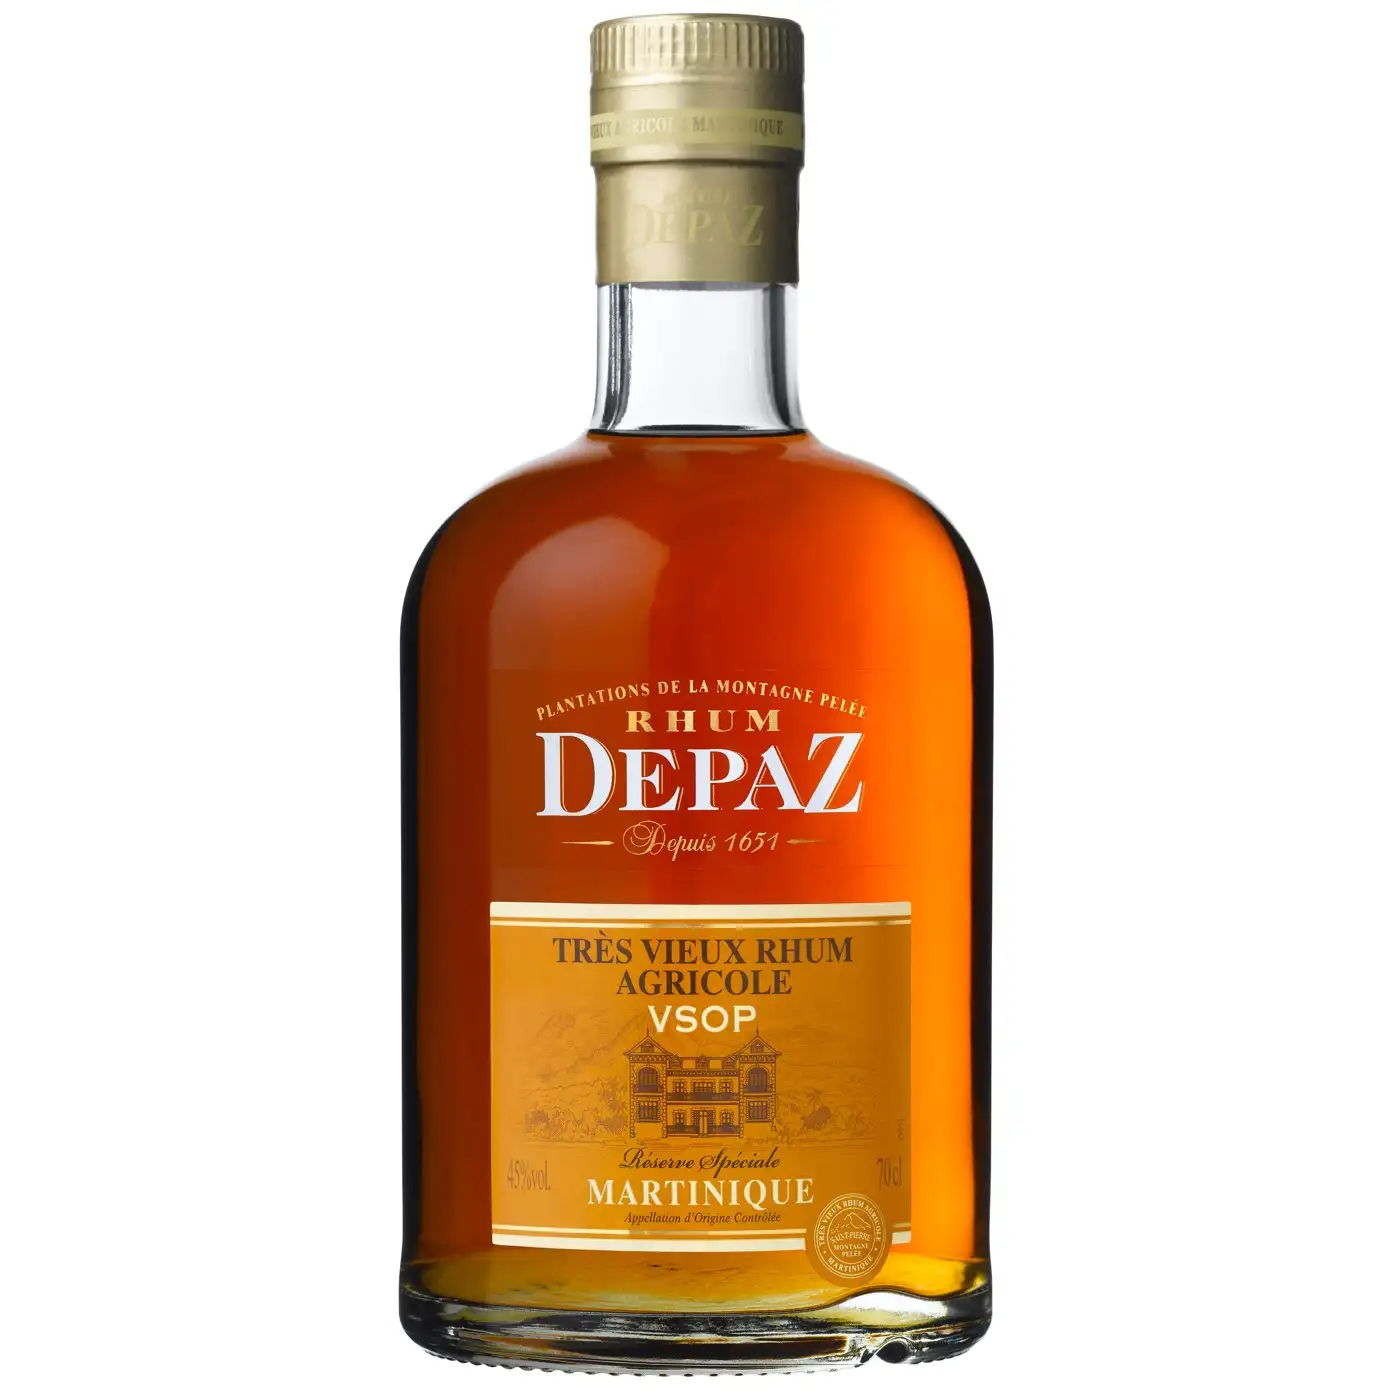 Image of the front of the bottle of the rum VSOP Spéciale Réserve